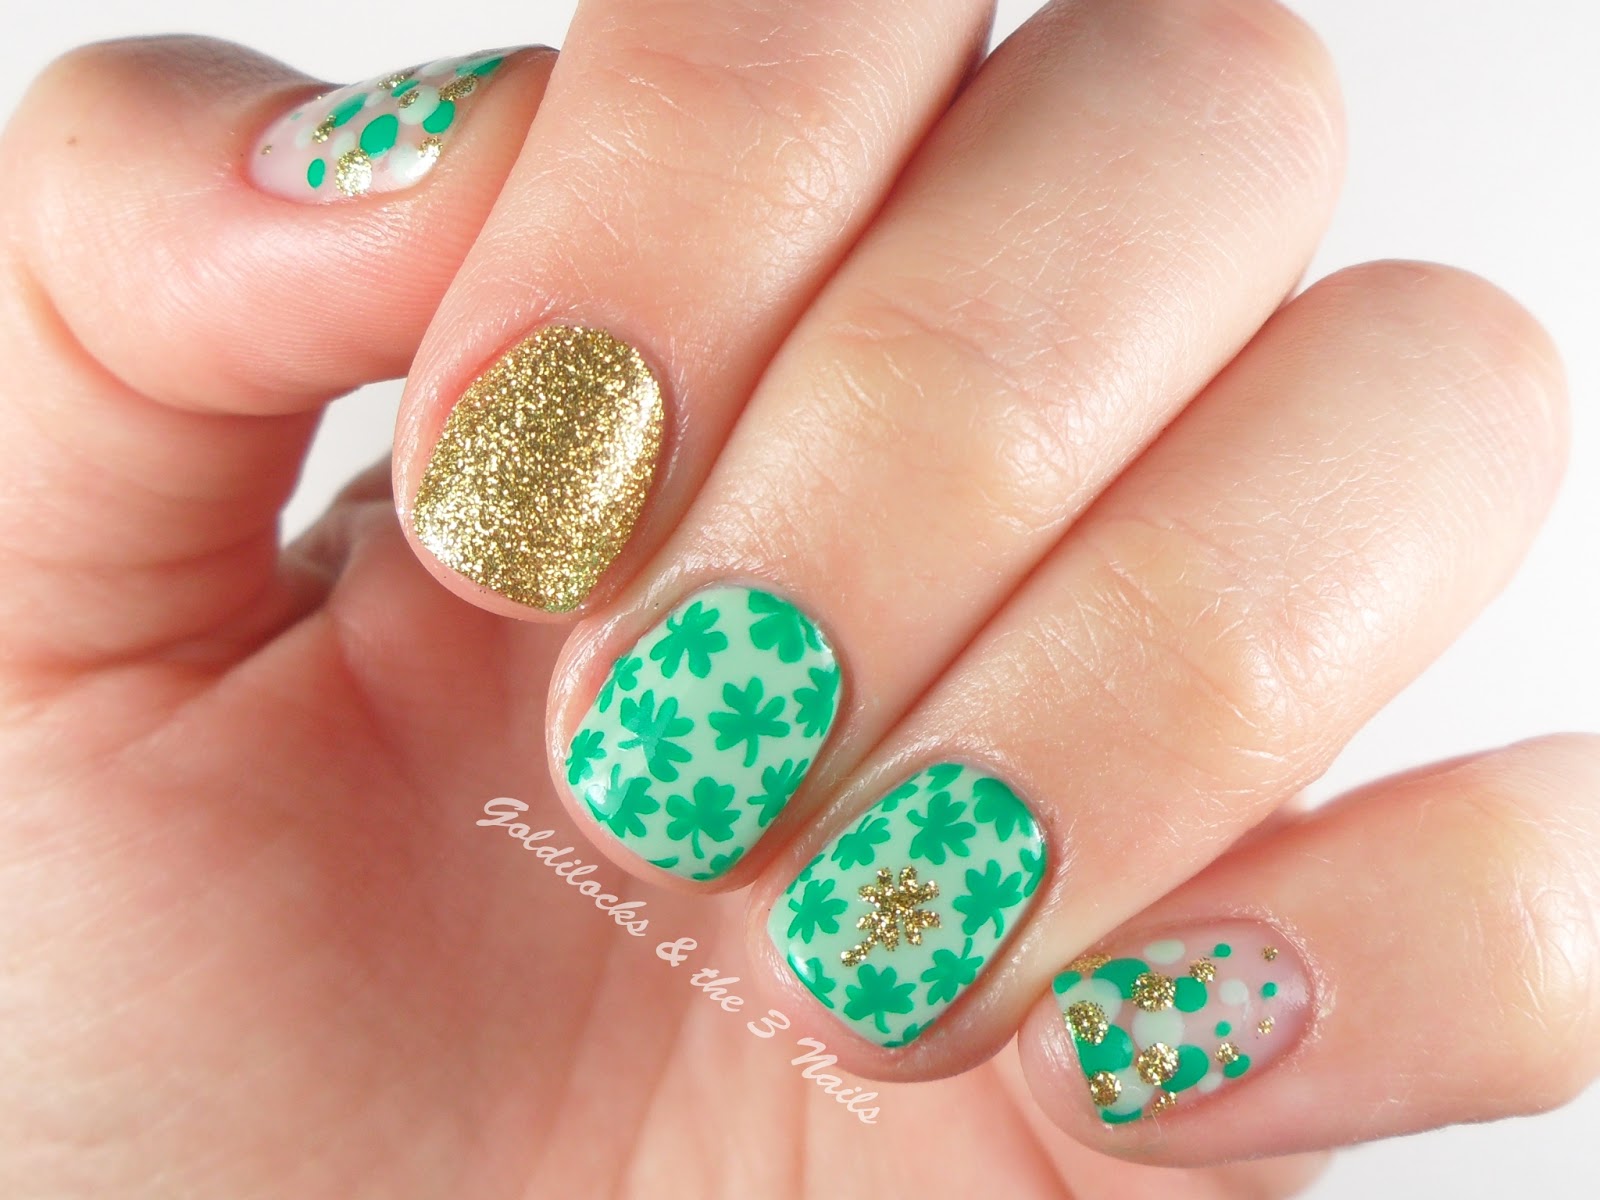 8. "2024 St. Patrick's Day Nail Art Tutorial" - wide 6